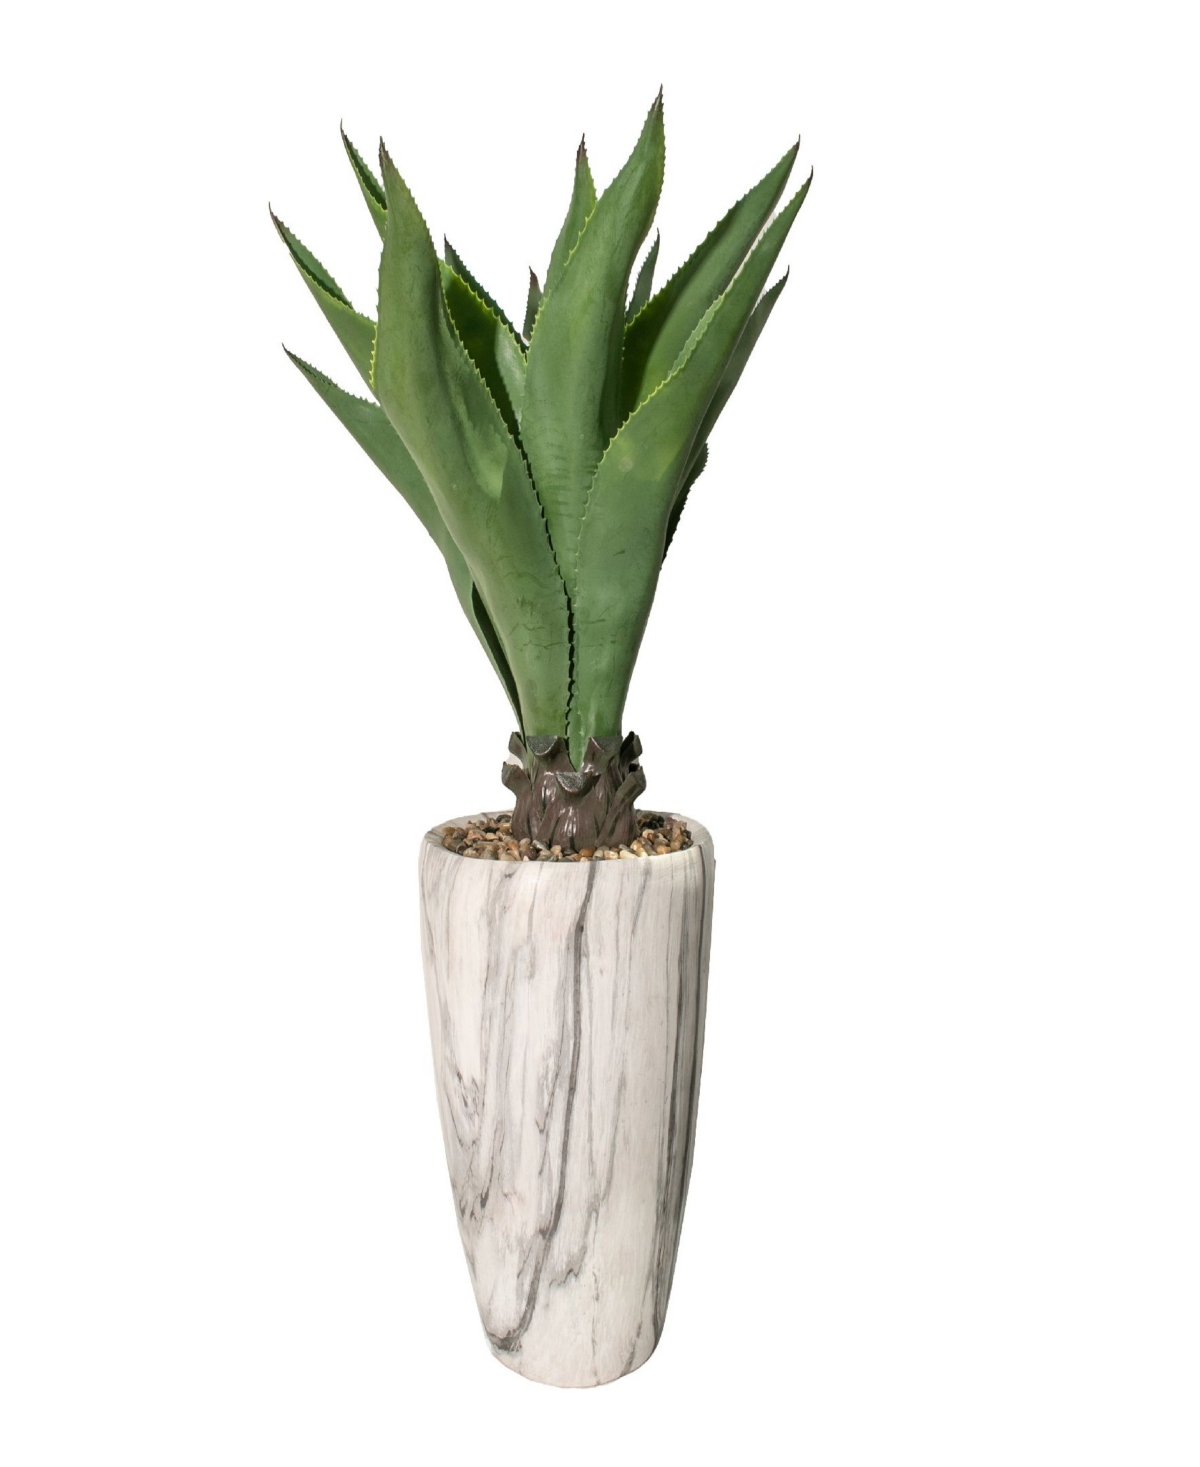 36" Tall Realistic Agave Plant in Fiber Stone Planter - Green